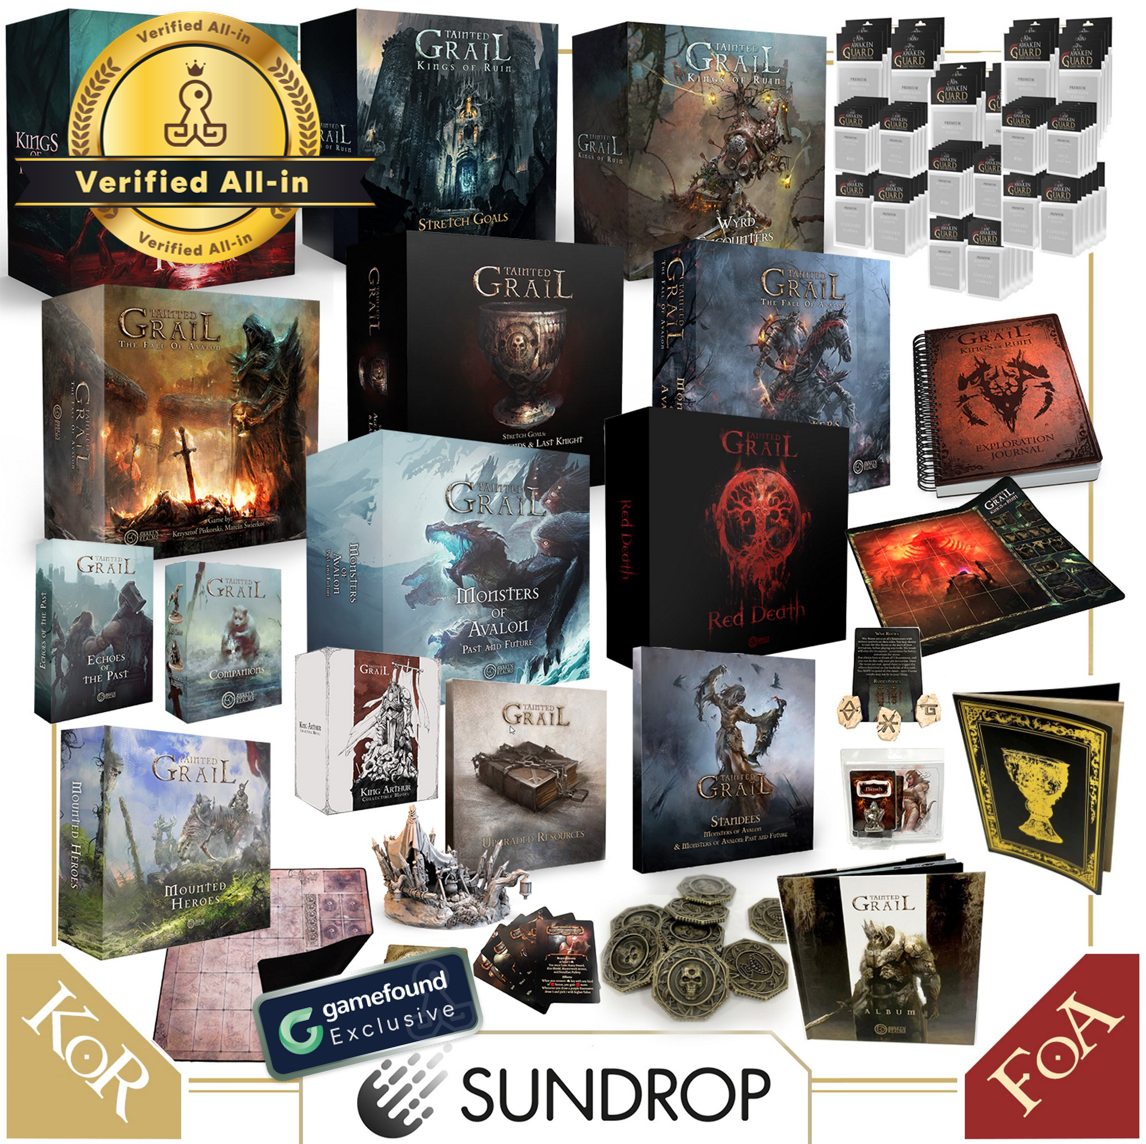 Gamefound Exclusive Tainted Grail Verified One True King All-In Pledge, Sundrop Edition